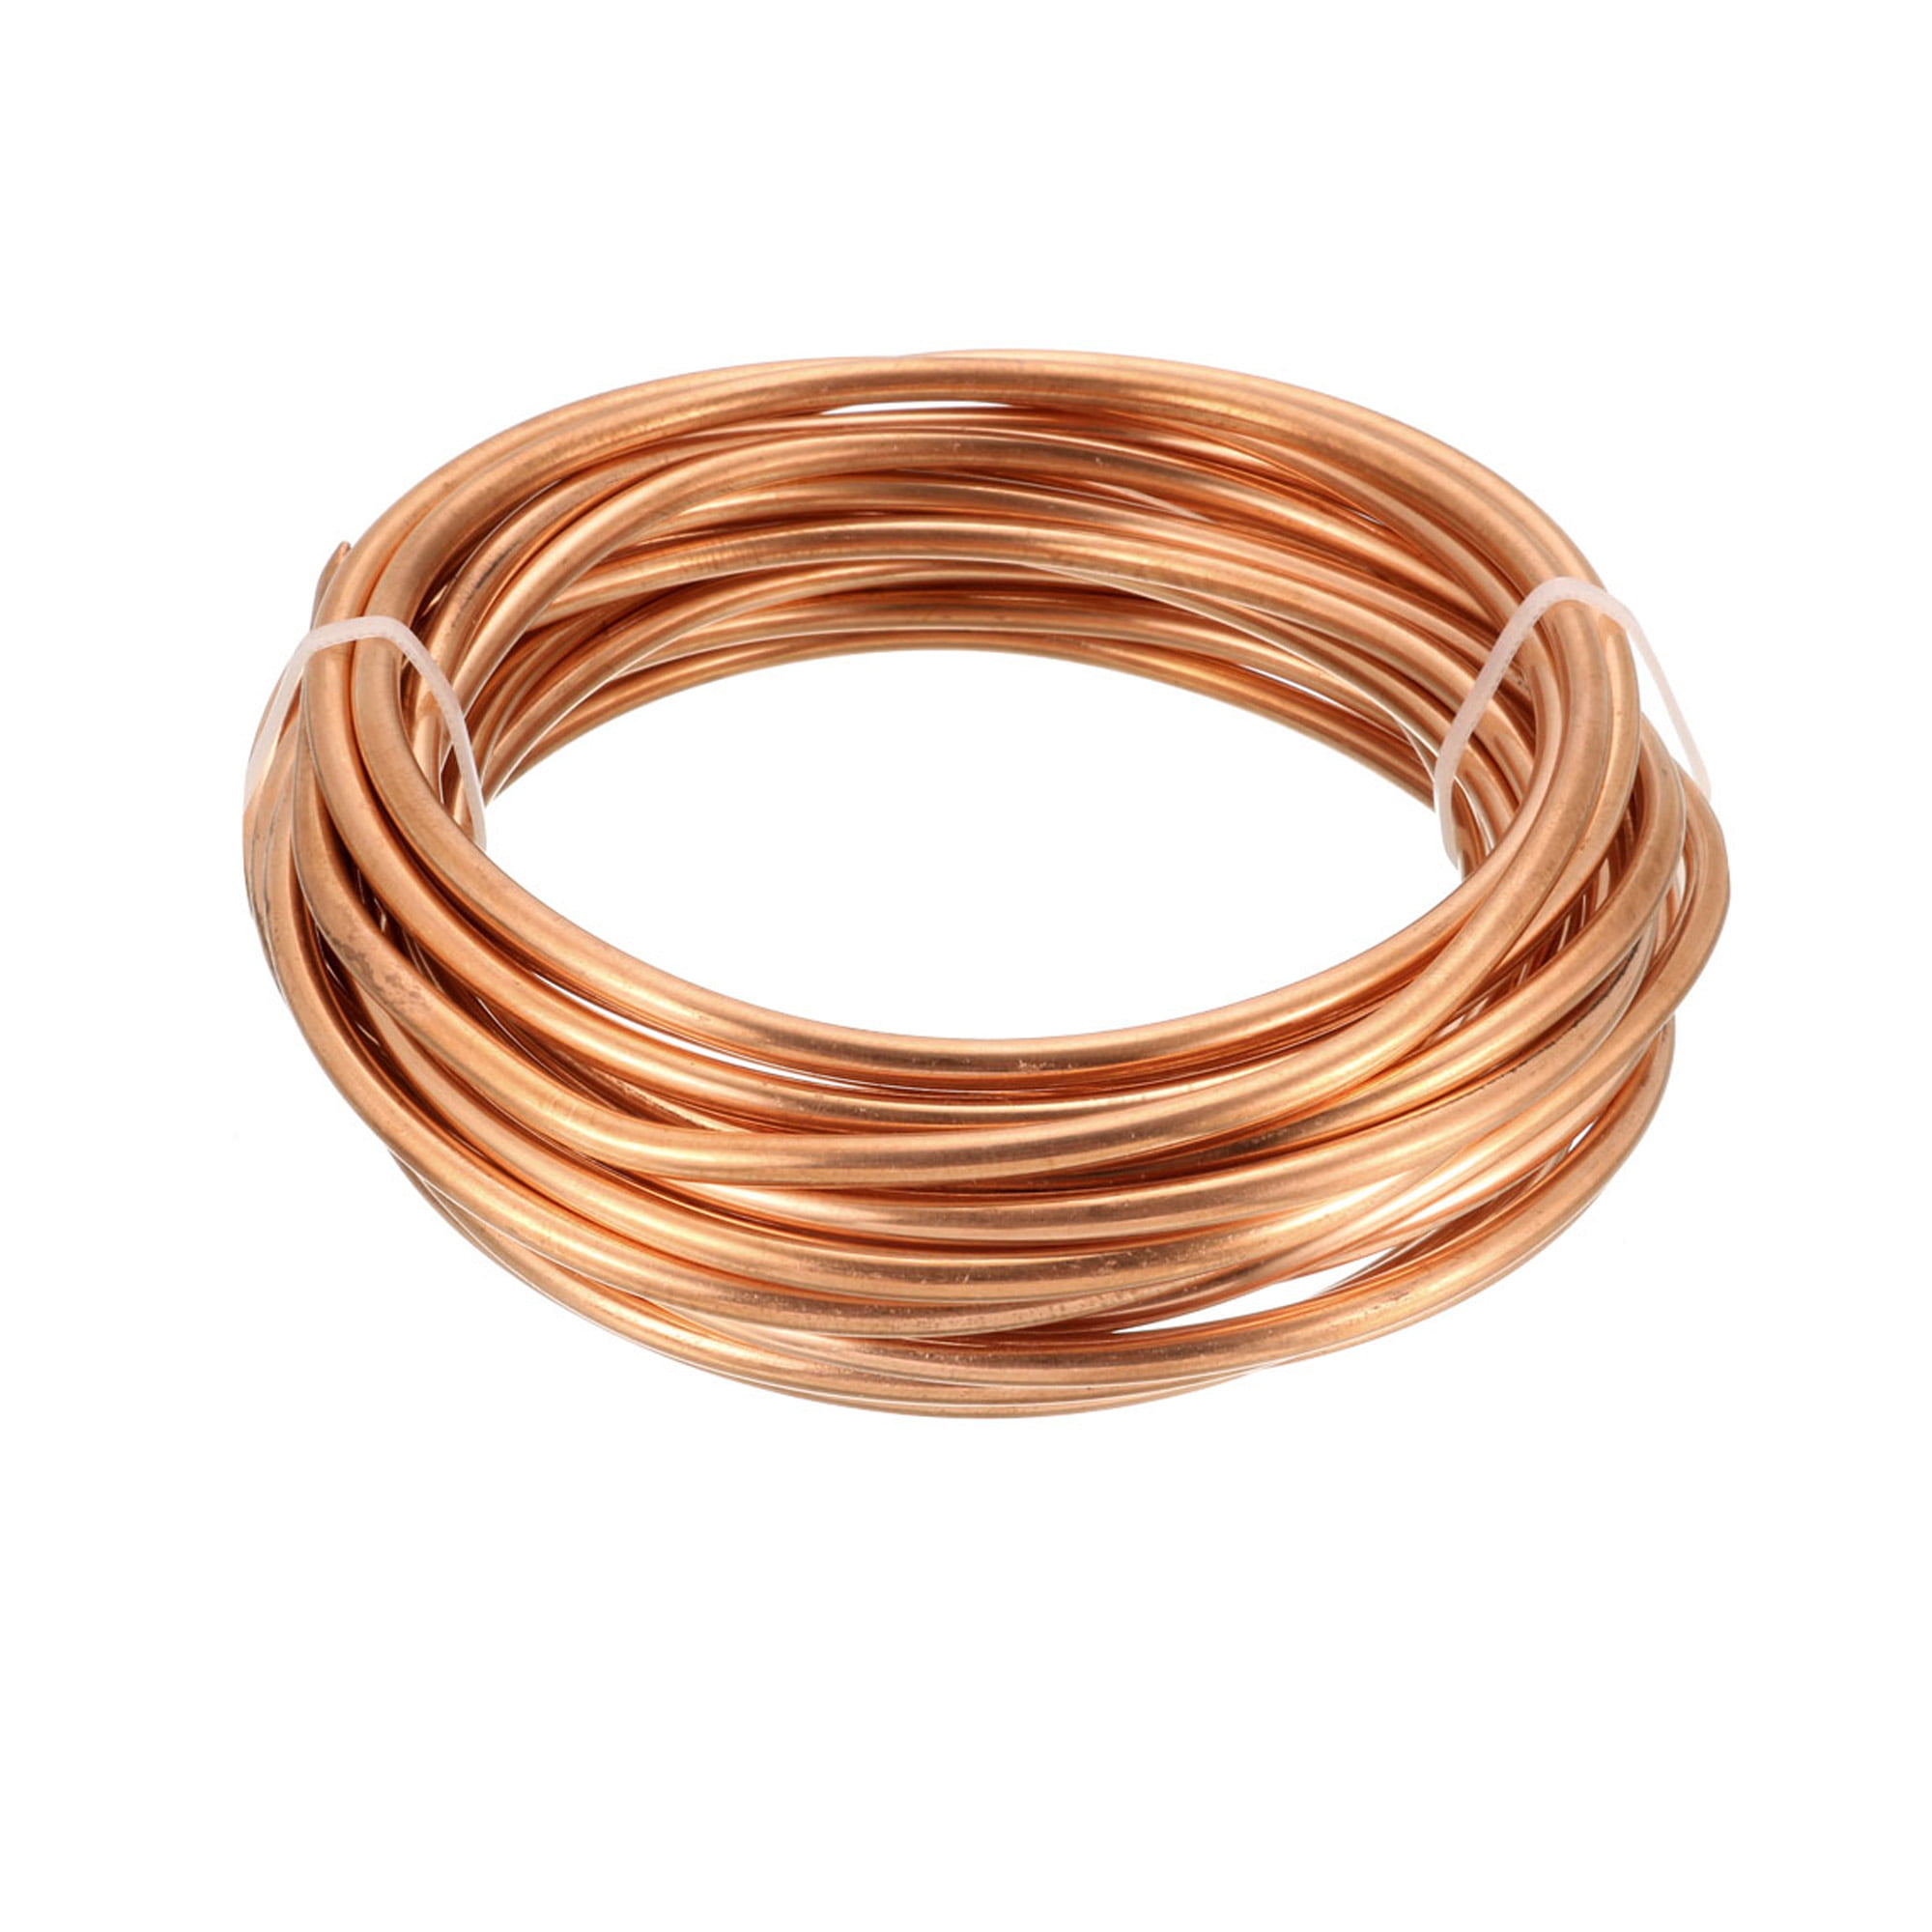 uxcell Refrigeration Tubing 2.5mm OD x 1.5mm ID x 24.5Ft Length Copper Tubing Coil